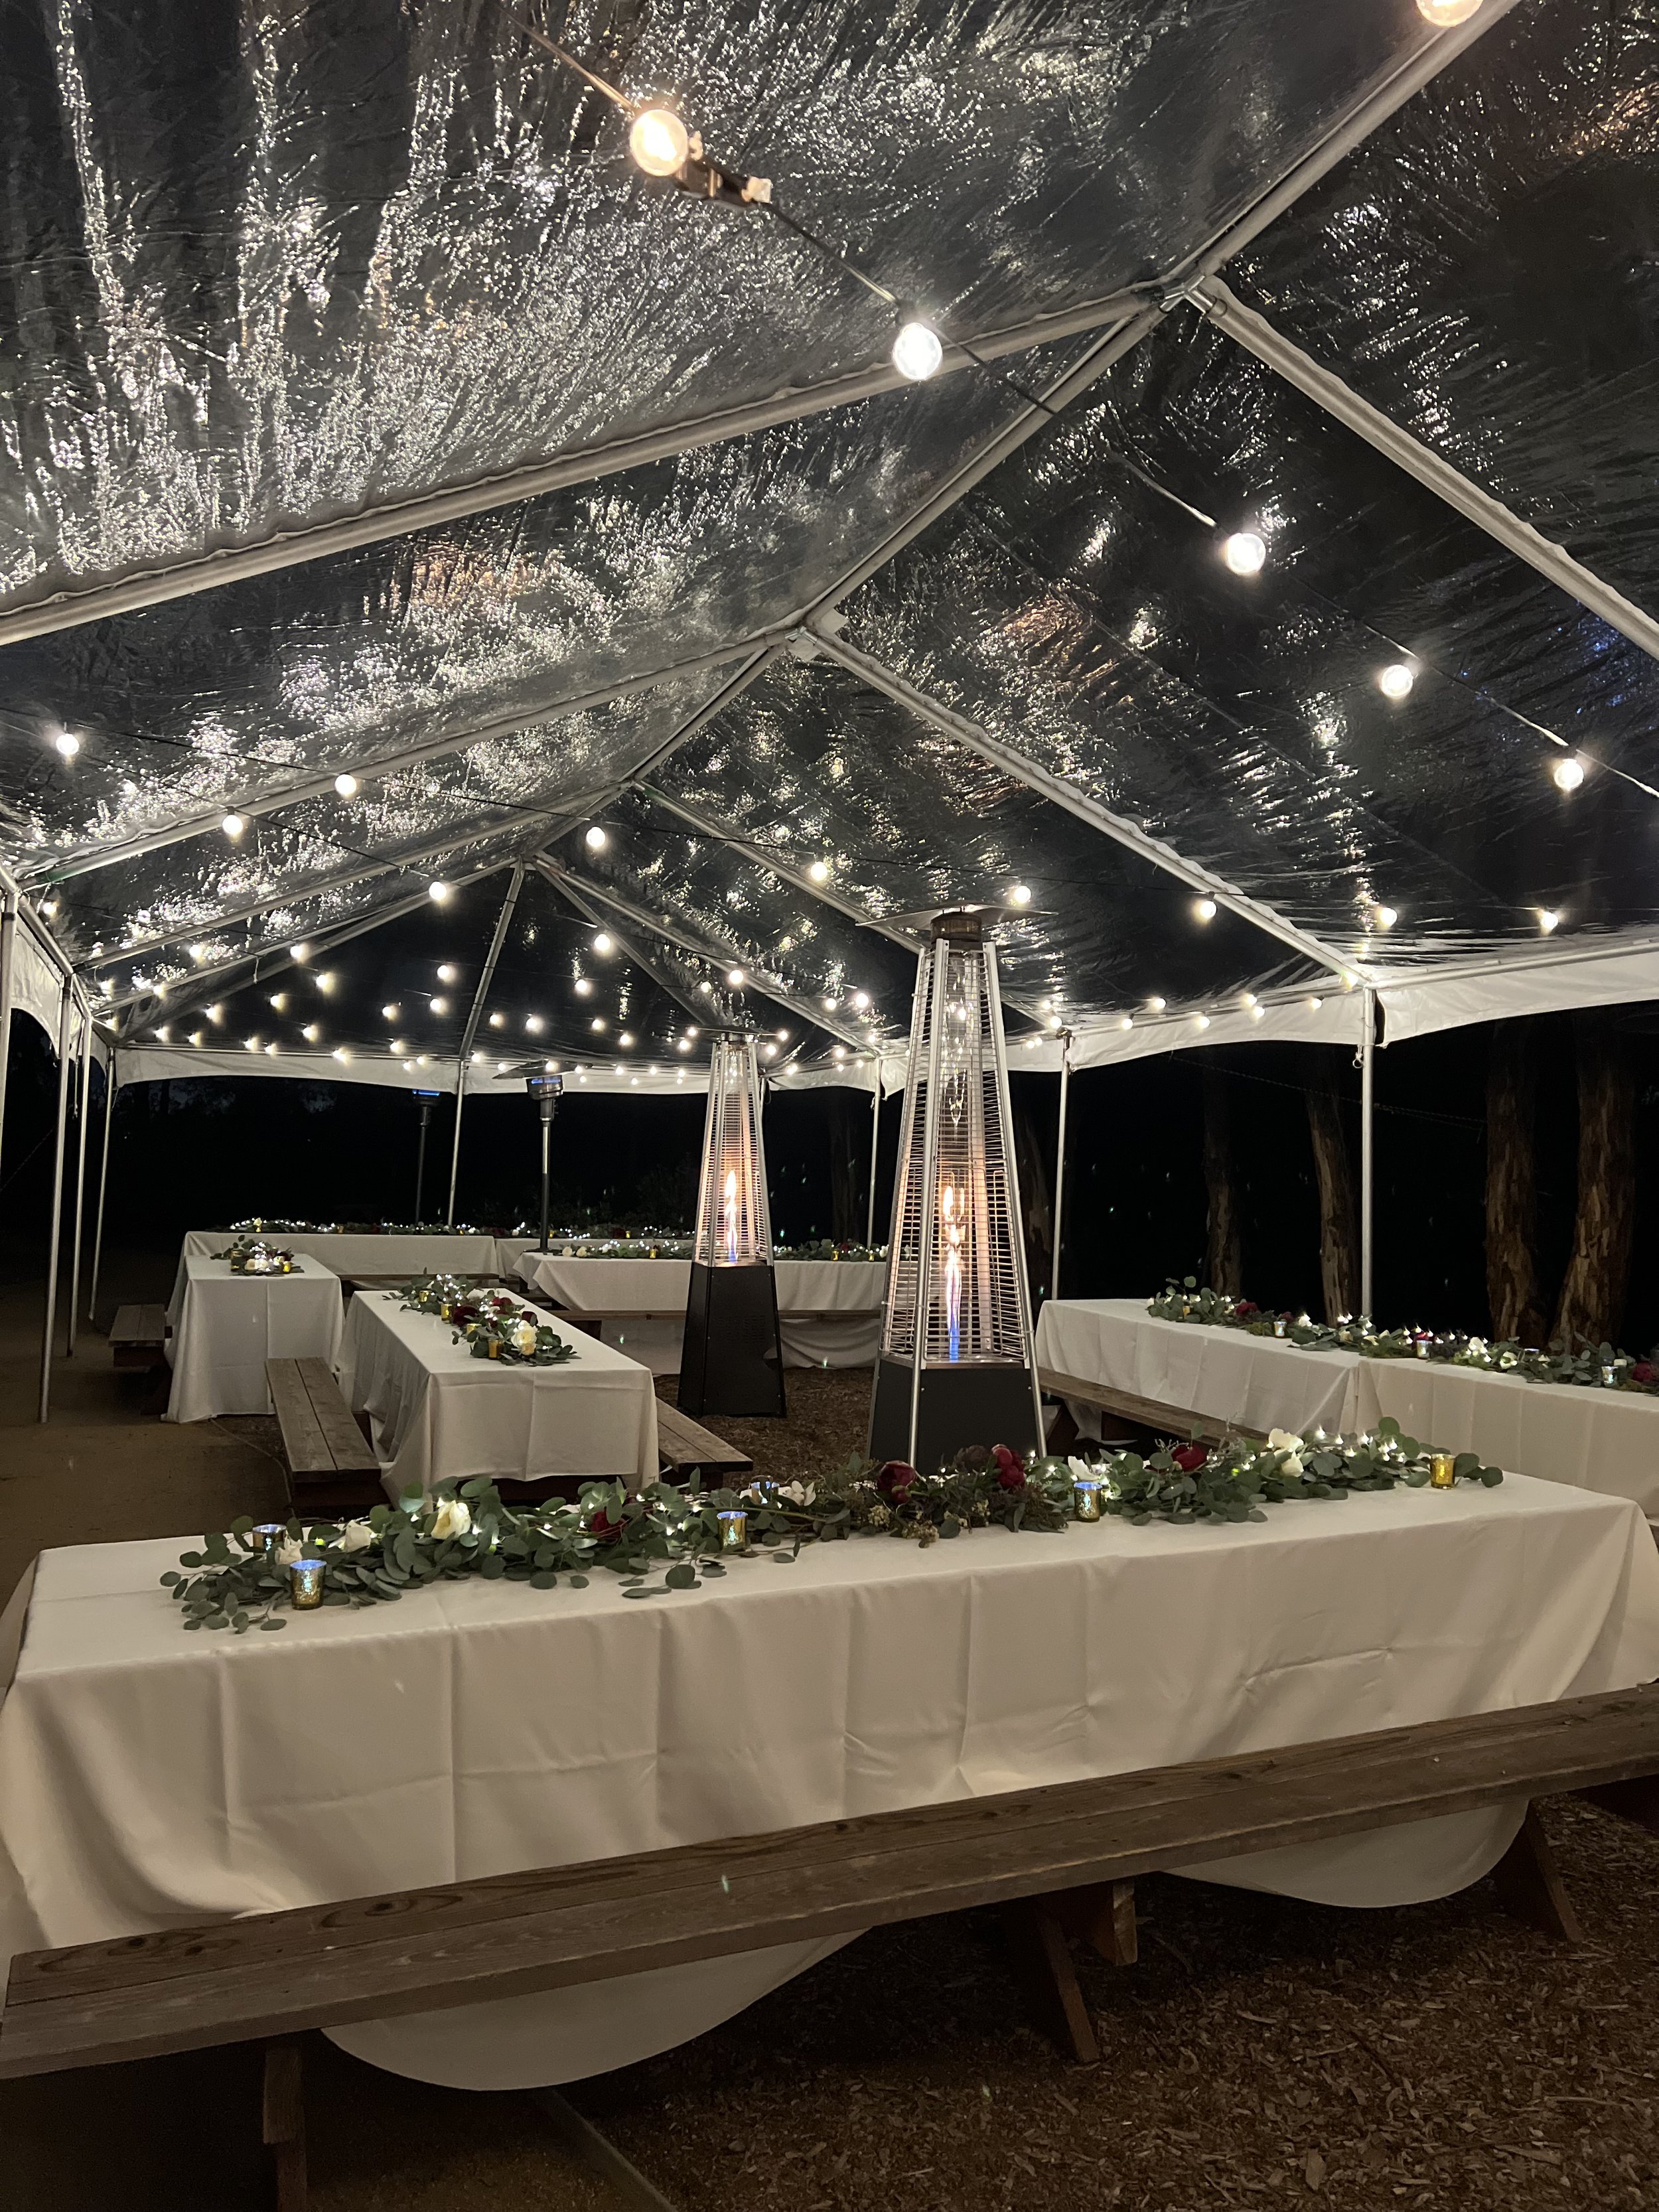 20'x20' CLEAR TENT